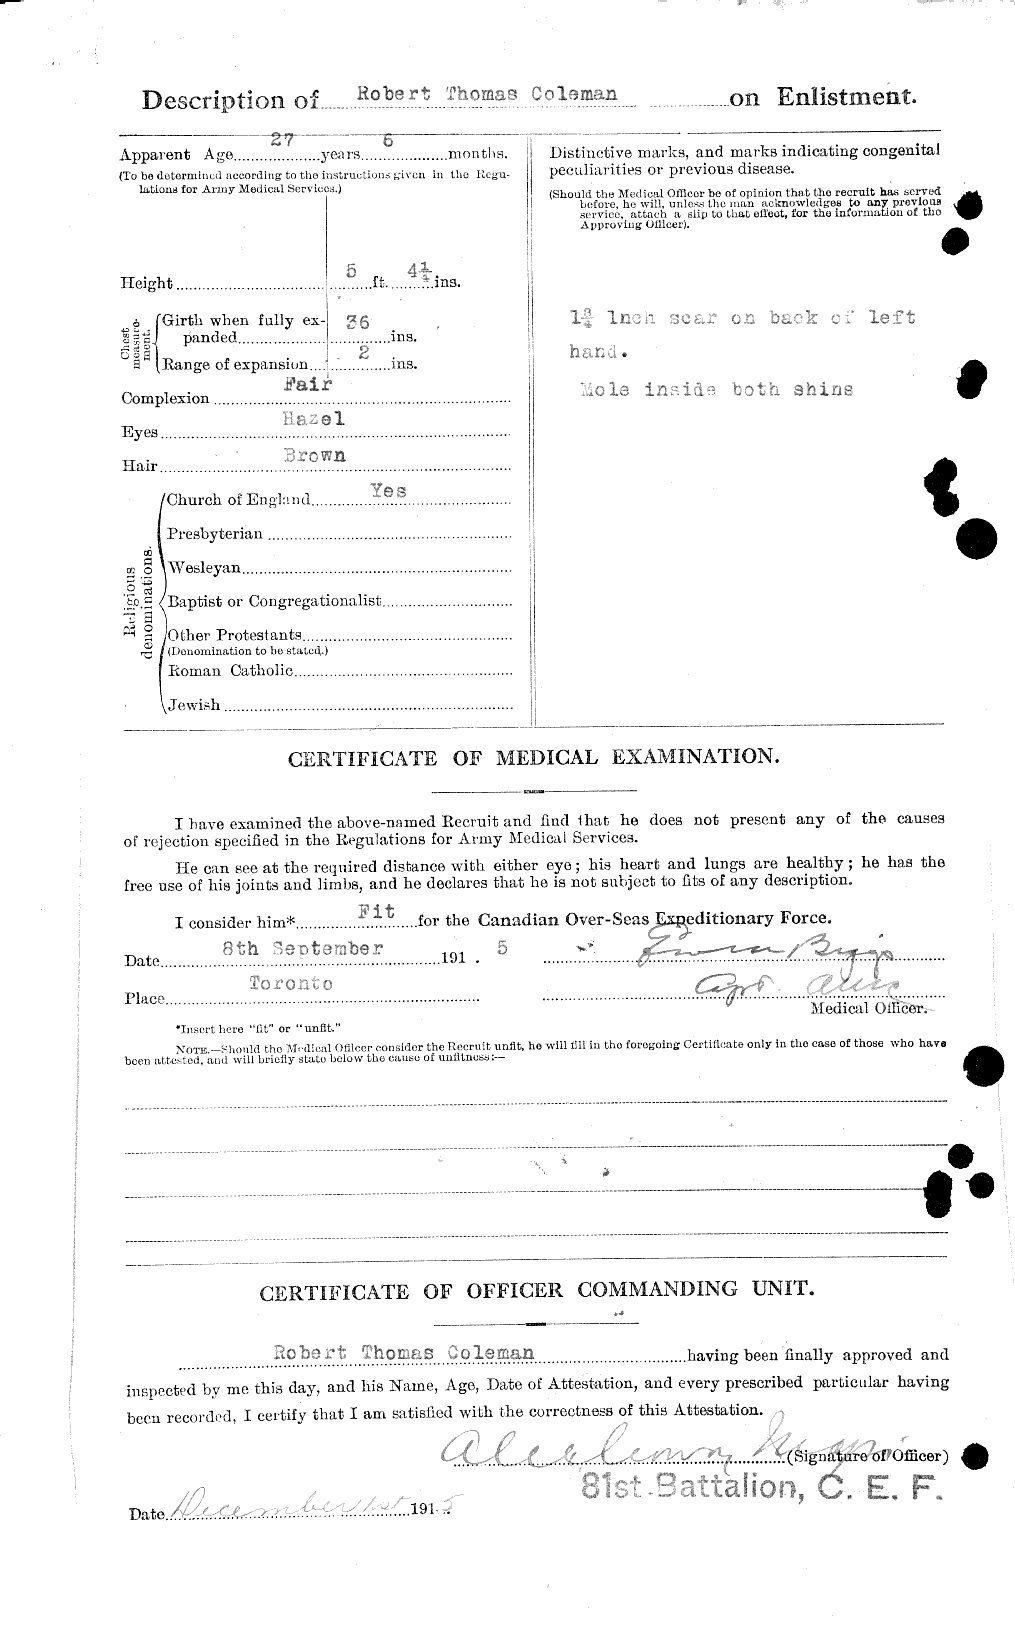 Personnel Records of the First World War - CEF 028262b